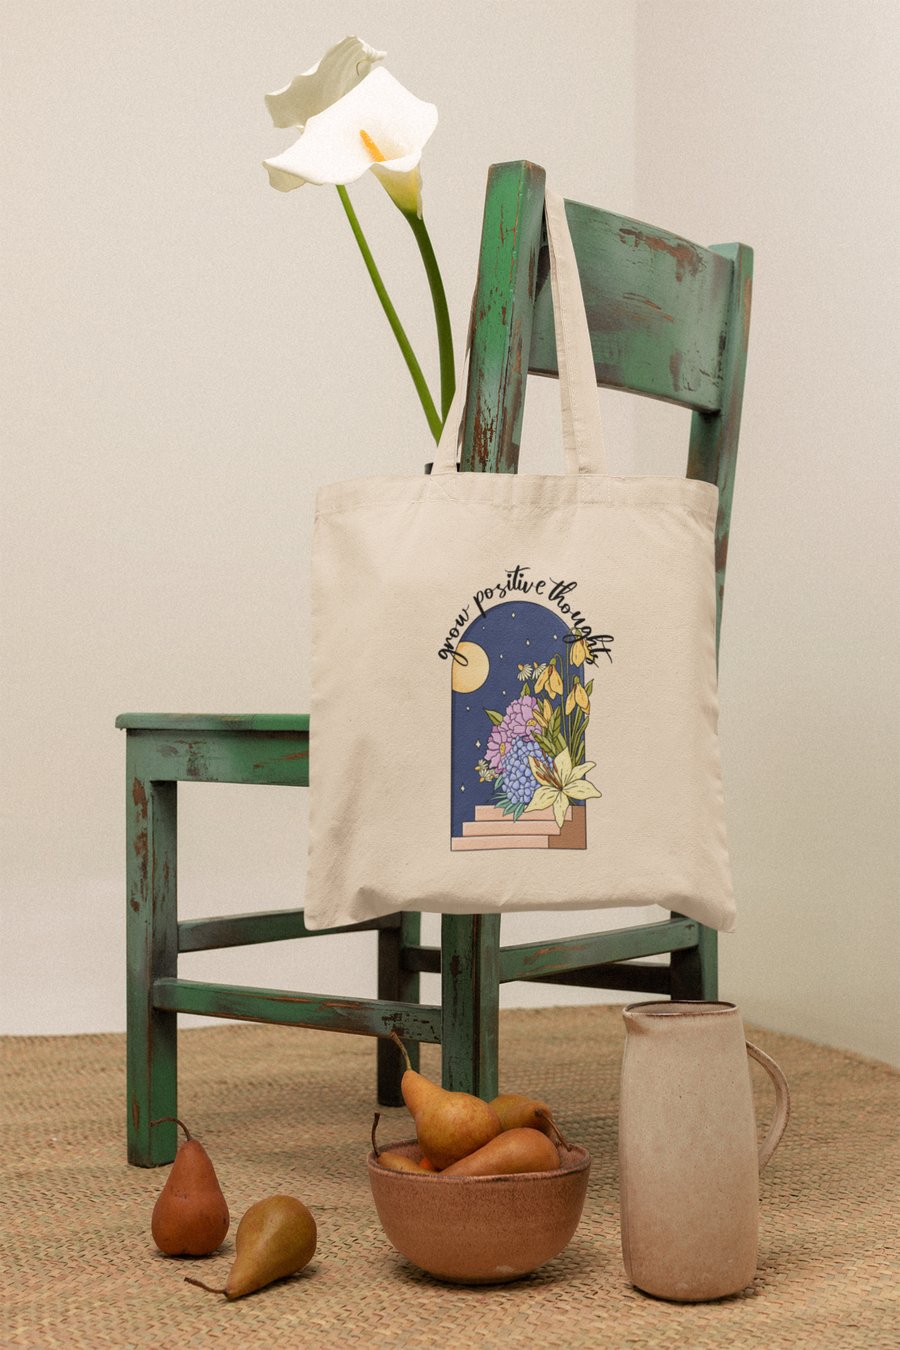 Grow positive thoughts tote bag, Handmade tote bag, 100% Cotton, recyclable